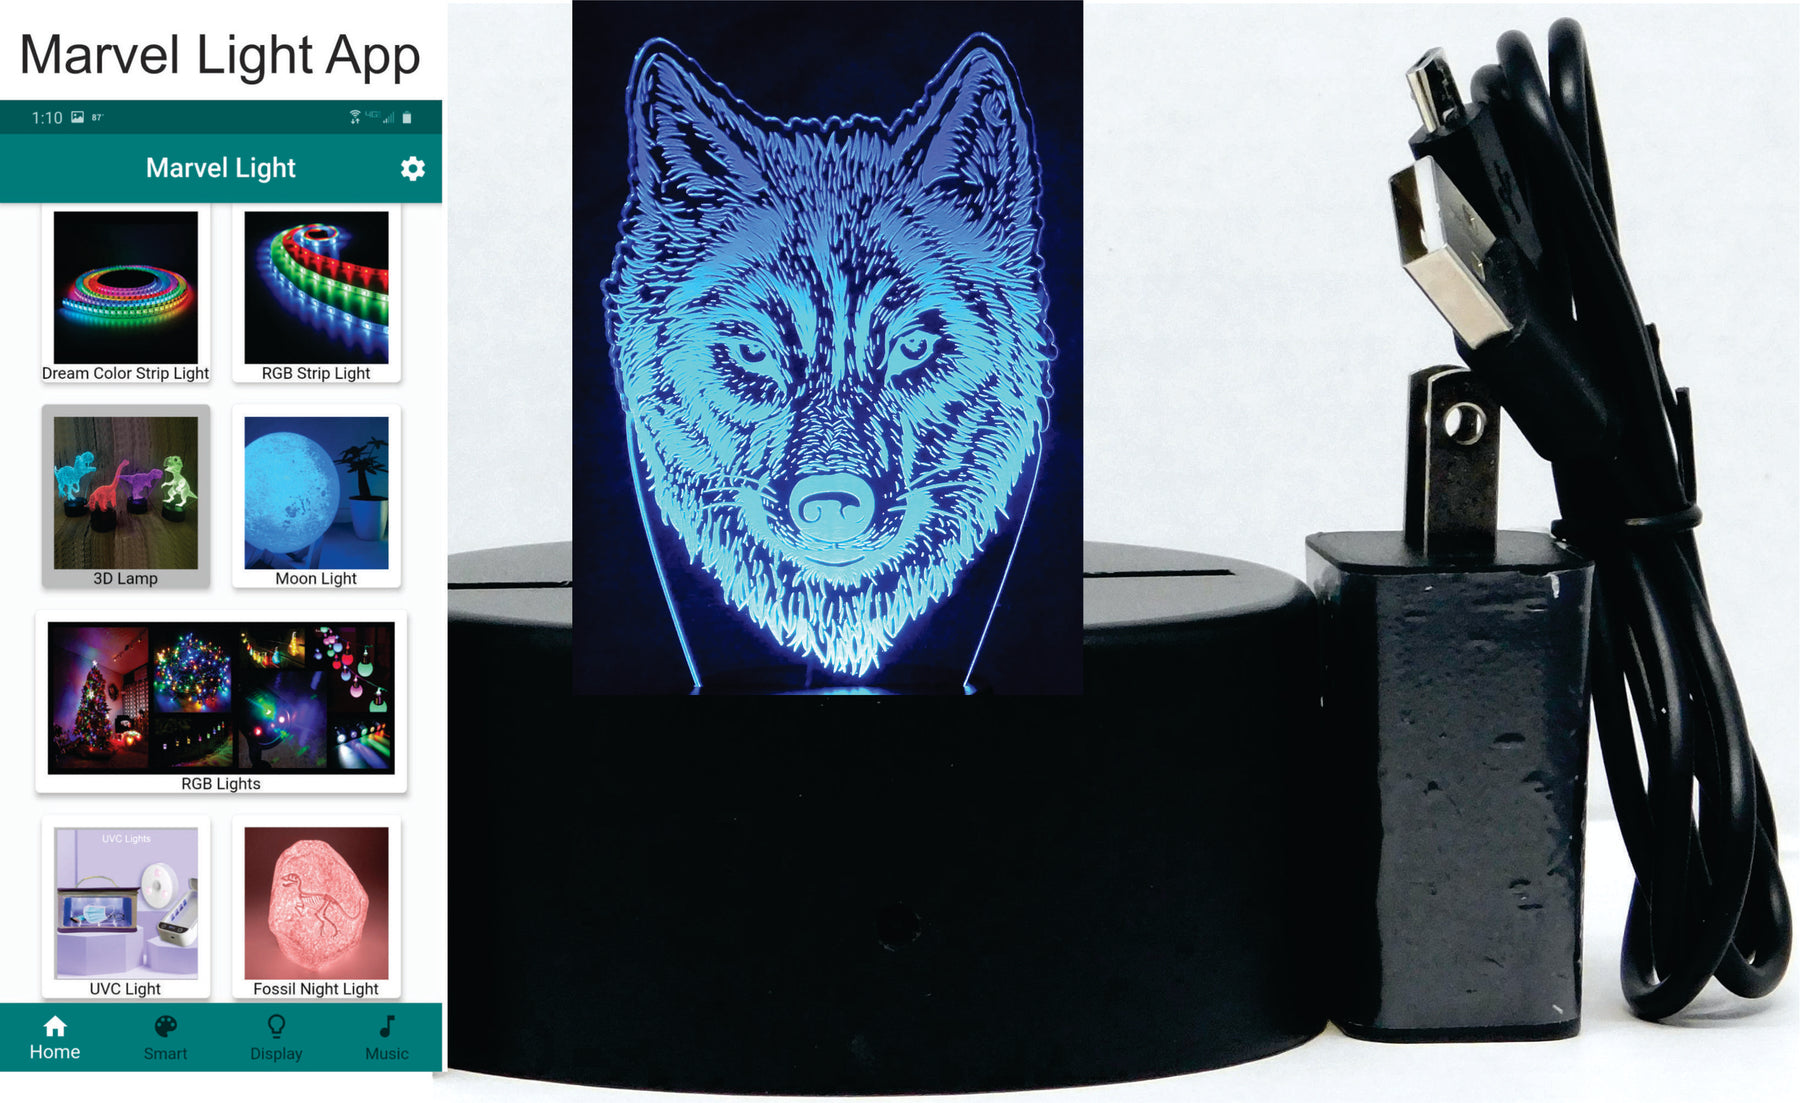 Wolf's Face Image 3-D Optical Illusion Multicolored Lamp